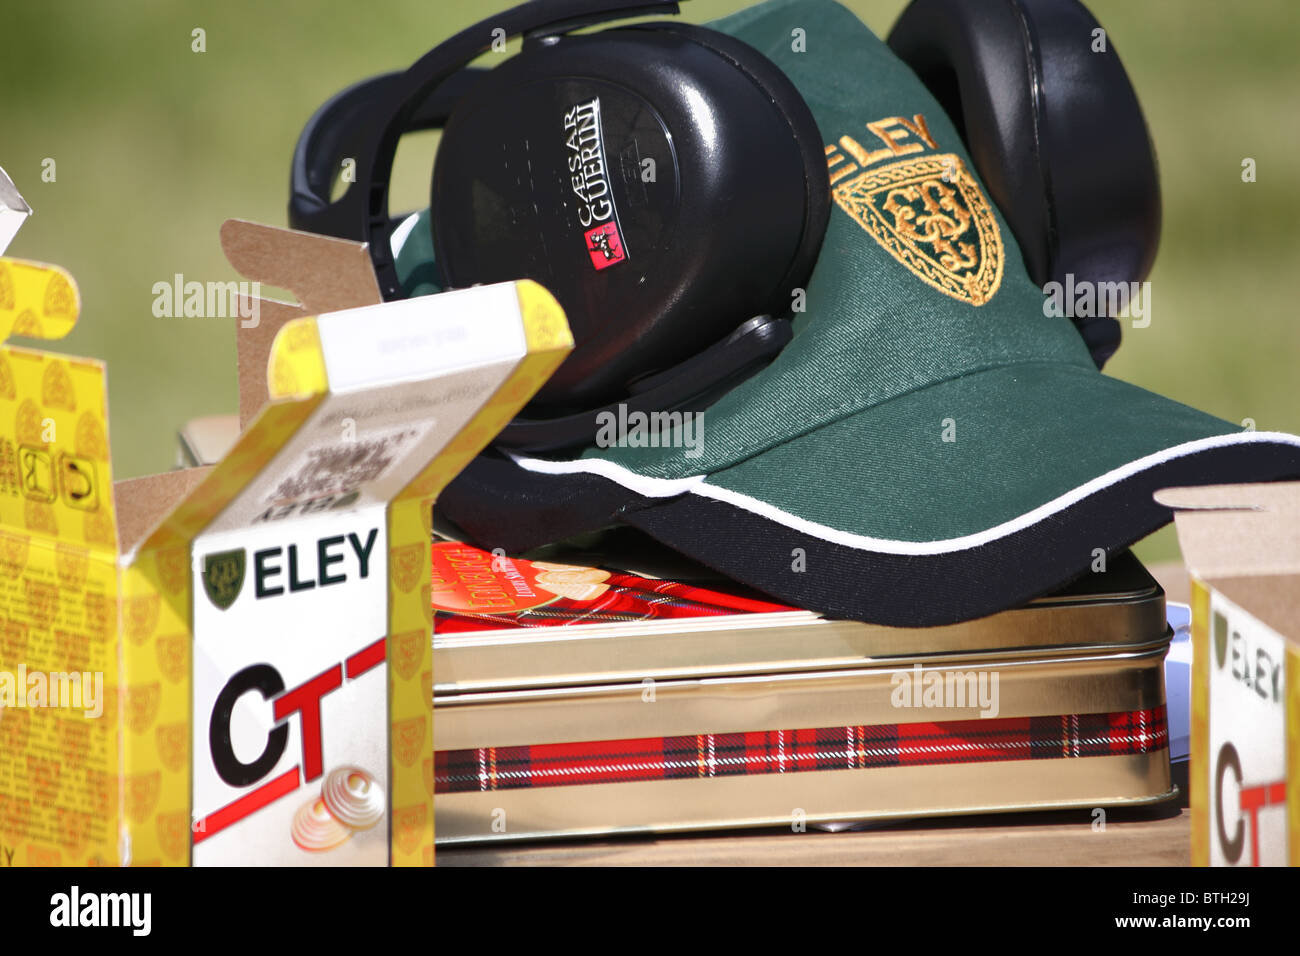 A set of ear defenders for safety at a clay pigeon range with a shooters cap and Eley cartridges ready to use. Stock Photo